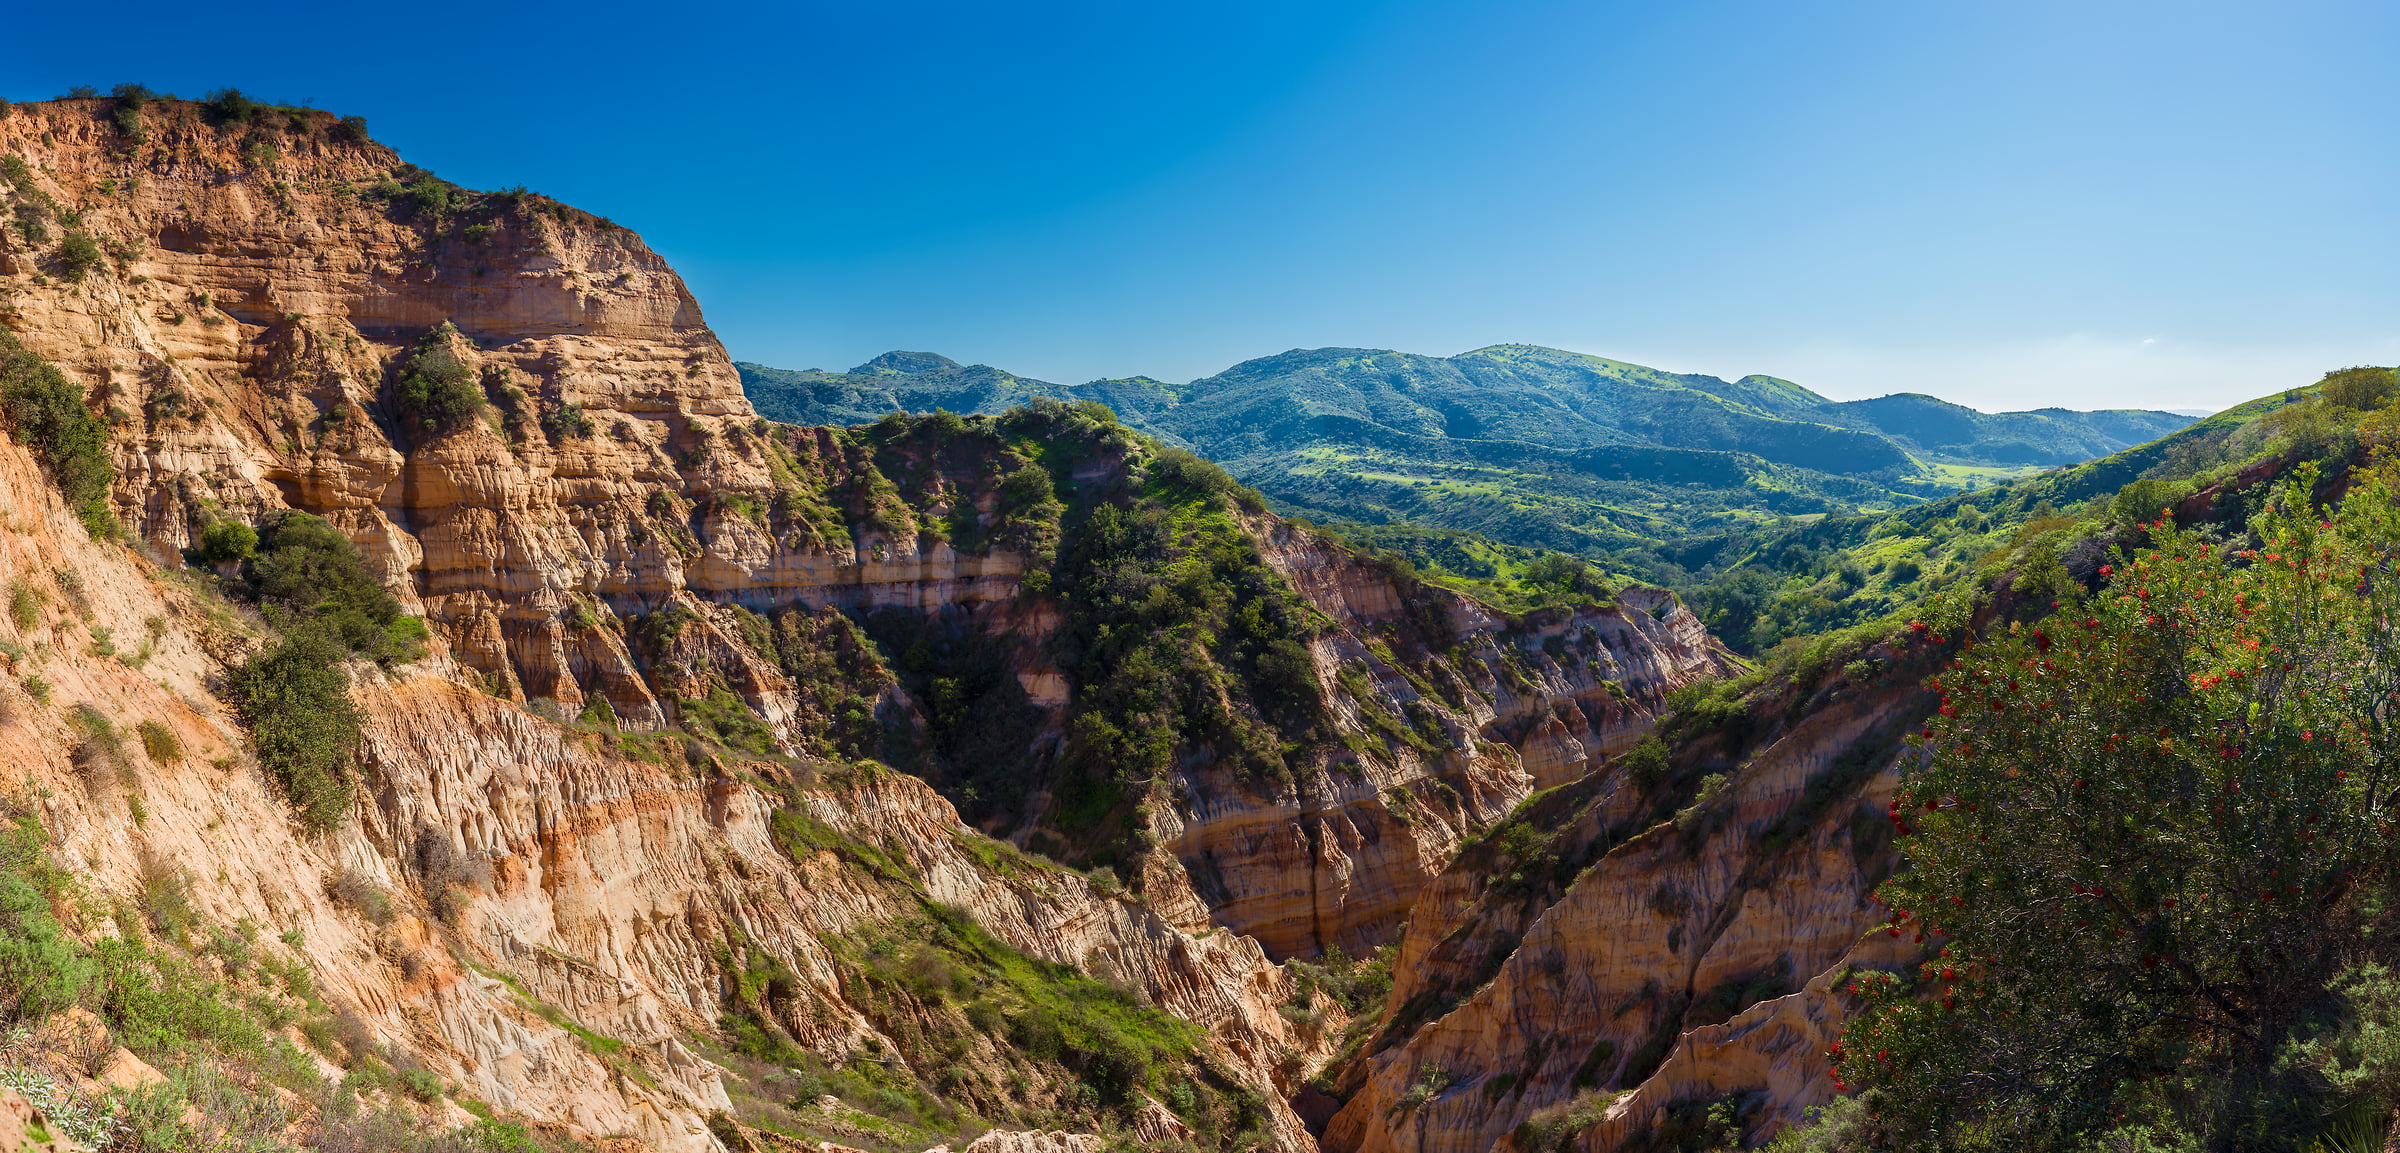 624 megapixels! A very high resolution, large-format VAST photo print of Limestone Canyon Regional Park; landscape photograph created by Jim Tarpo in Limestone Canyon Regional Park, California.